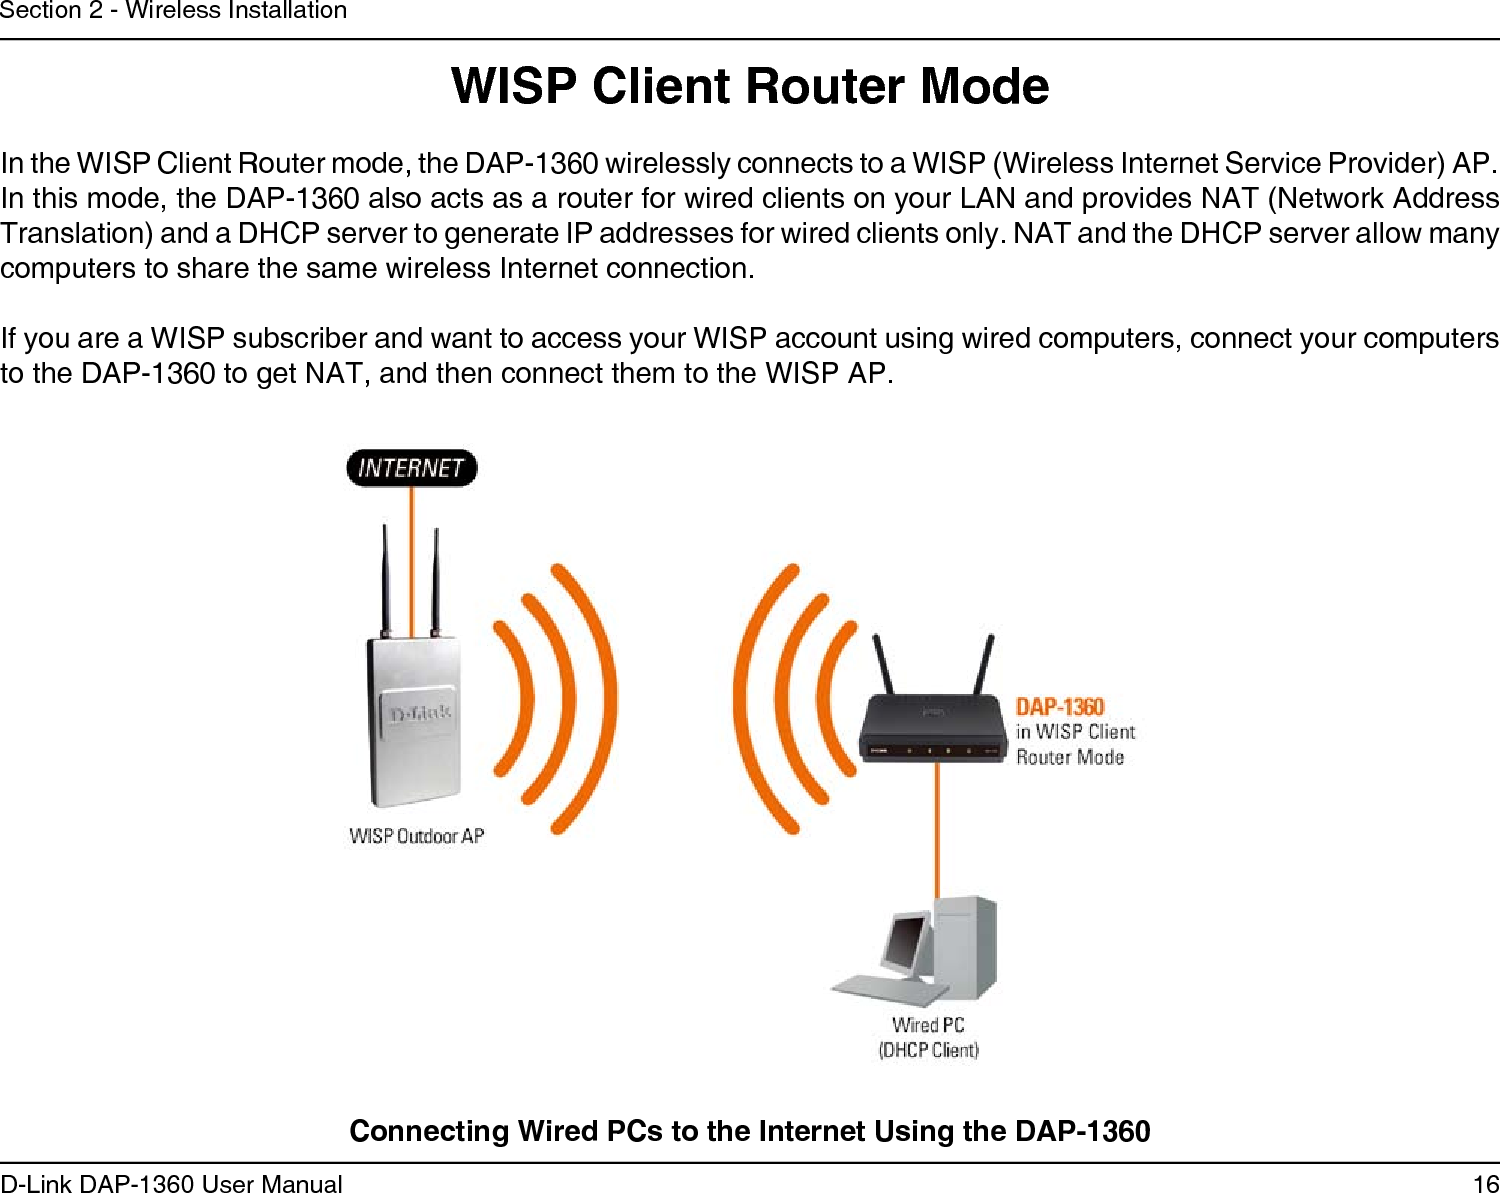 16D-Link DAP-1360 User ManualSection 2 - Wireless InstallationWISP Client Router ModeIn the WISP Client Router mode, the DAP-1360 wirelessly connects to a WISP (Wireless Internet Service Provider) AP. In this mode, the DAP-1360 also acts as a router for wired clients on your LAN and provides NAT (Network Address Translation) and a DHCP server to generate IP addresses for wired clients only. NAT and the DHCP server allow many computers to share the same wireless Internet connection.If you are a WISP subscriber and want to access your WISP account using wired computers, connect your computers  to the DAP-1360 to get NAT, and then connect them to the WISP AP.Connecting Wired PCs to the Internet Using the DAP-1360